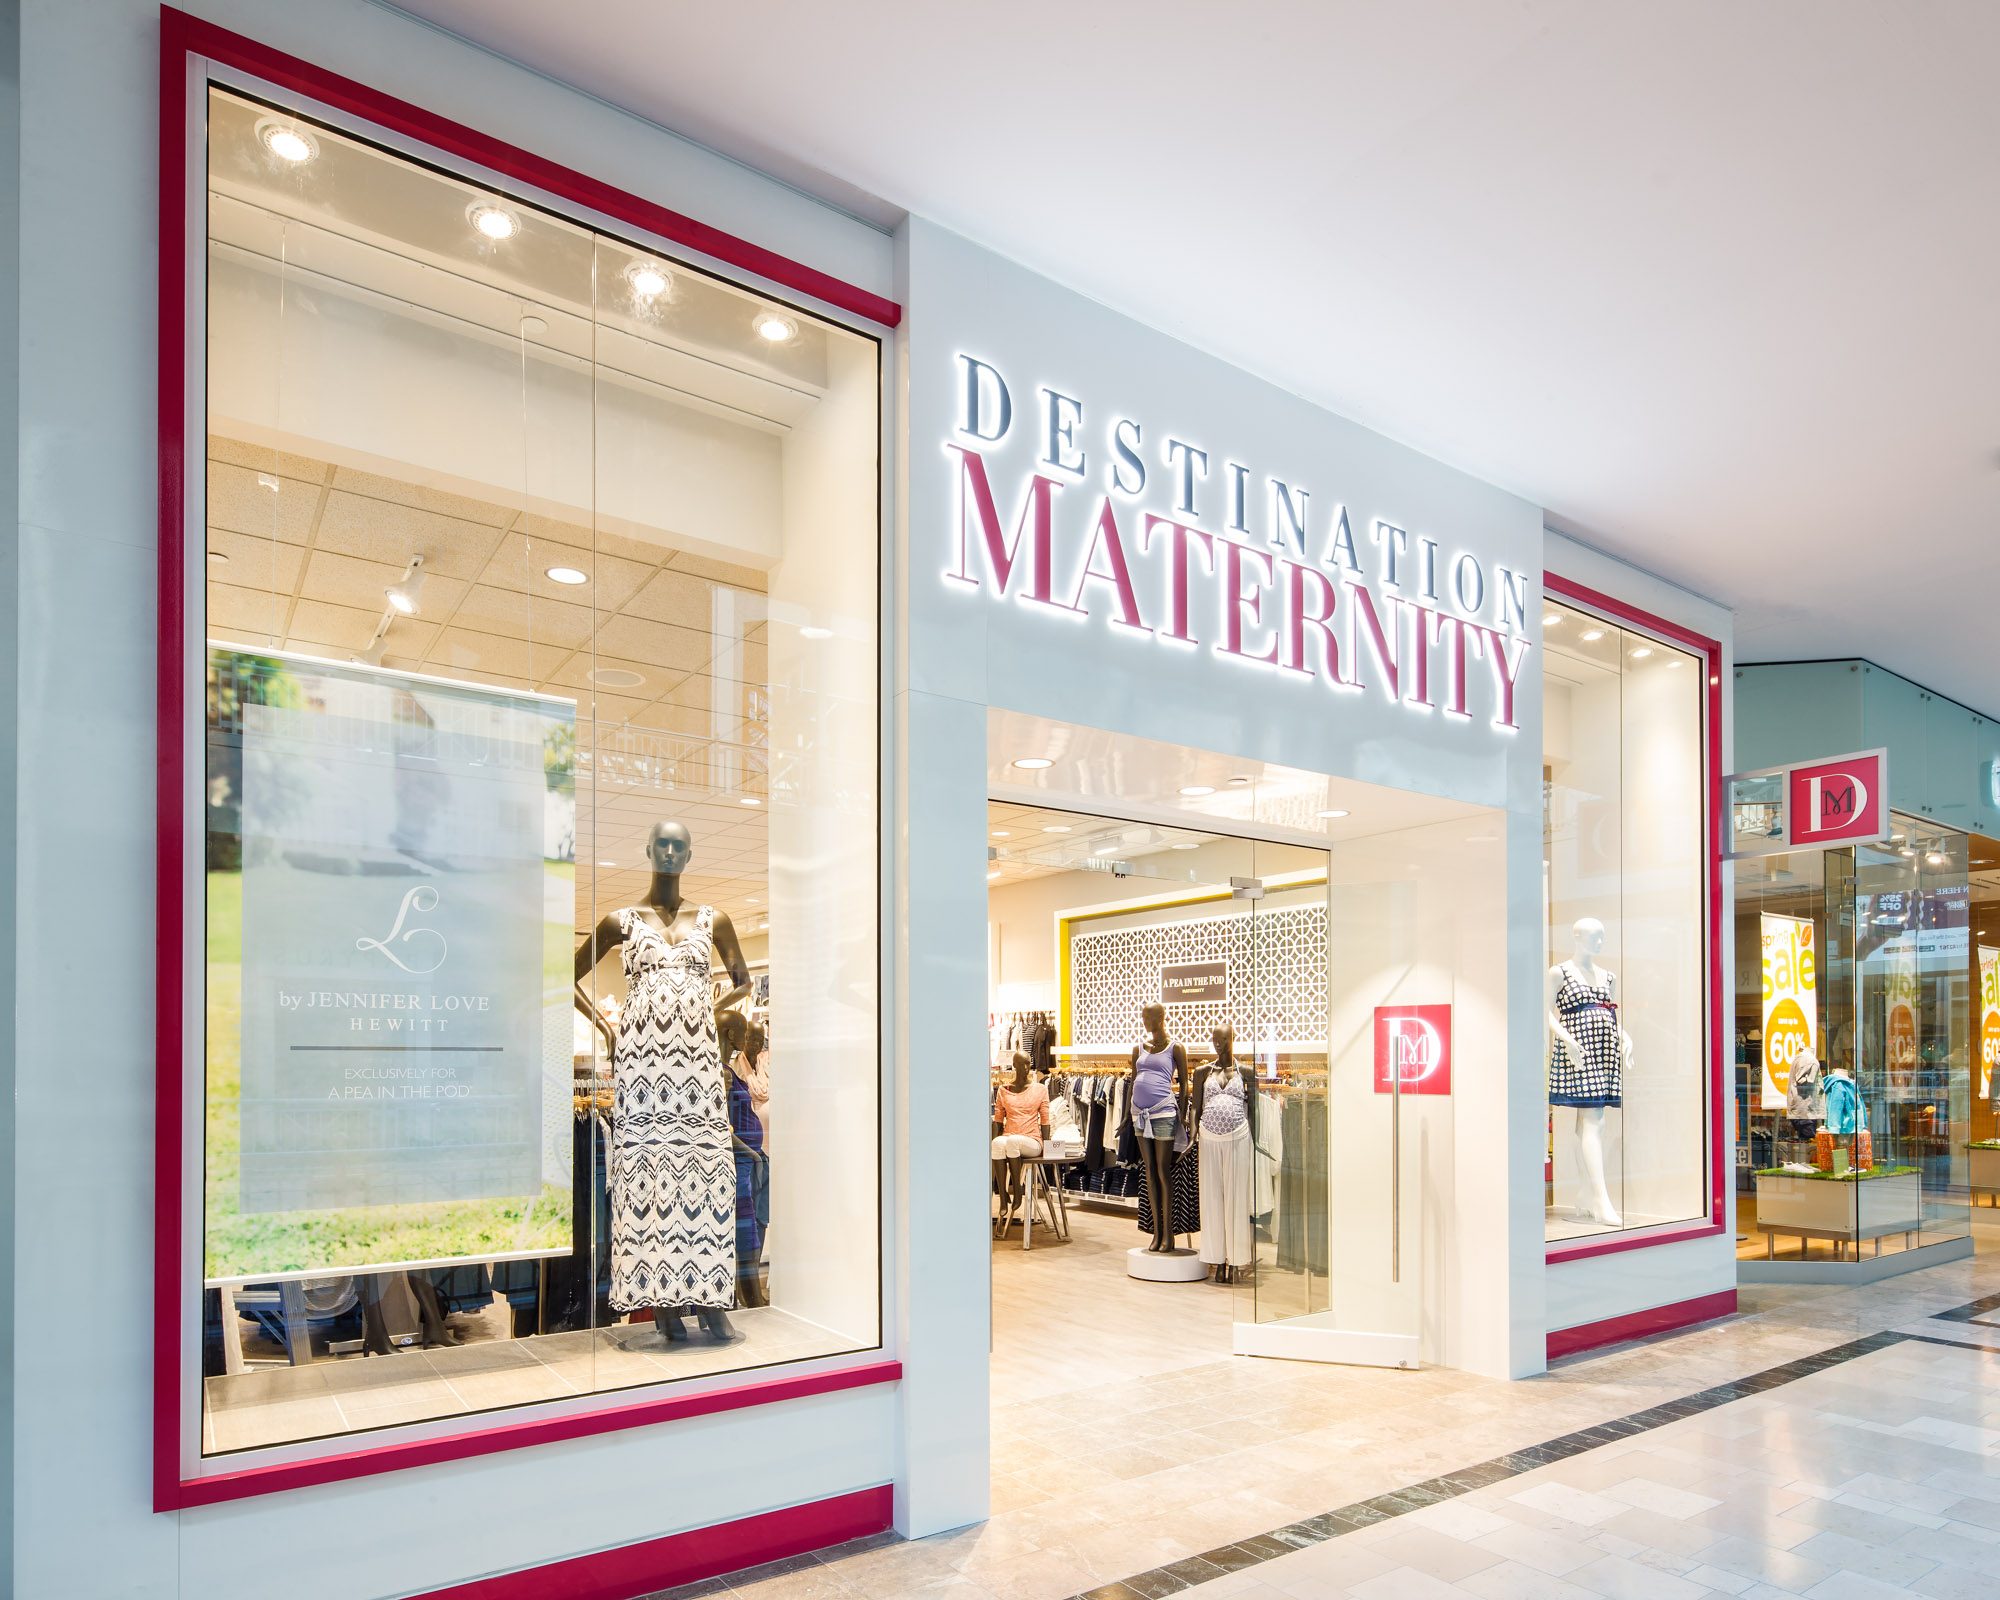 Destination Maternity store opens at Bridgewater Commons in